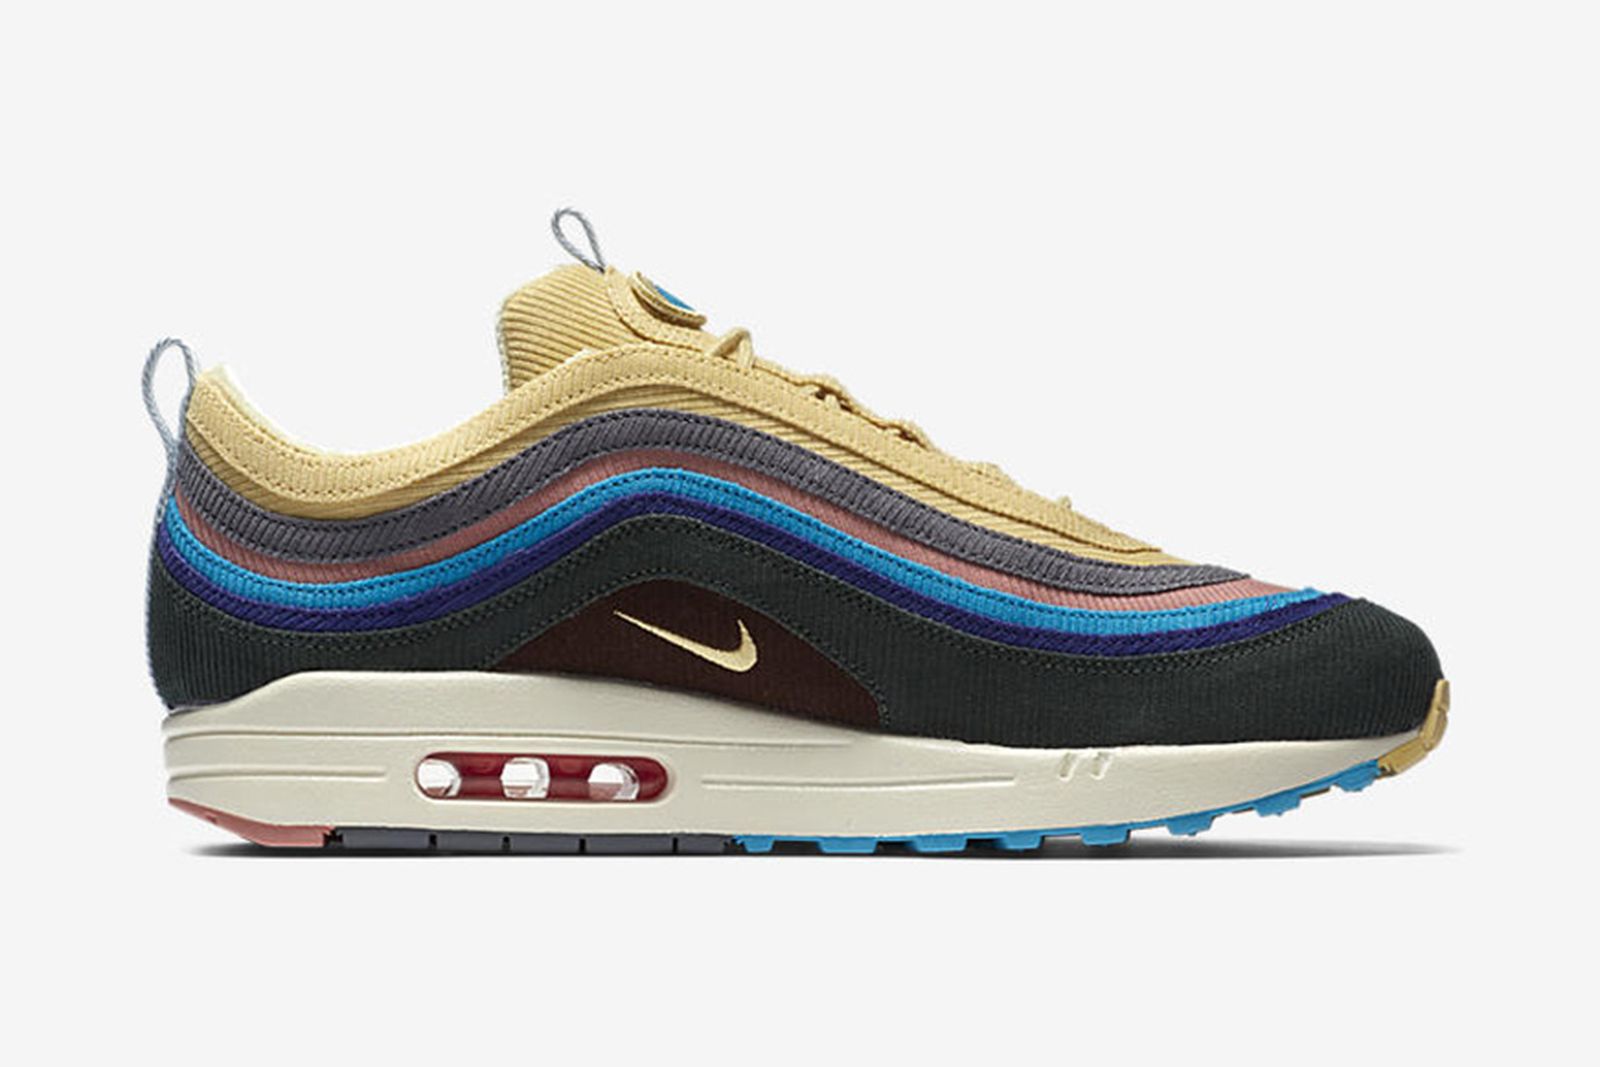 Sean Wotherspoon x Nike Air Max 1/97: Release Date, Price, & Info